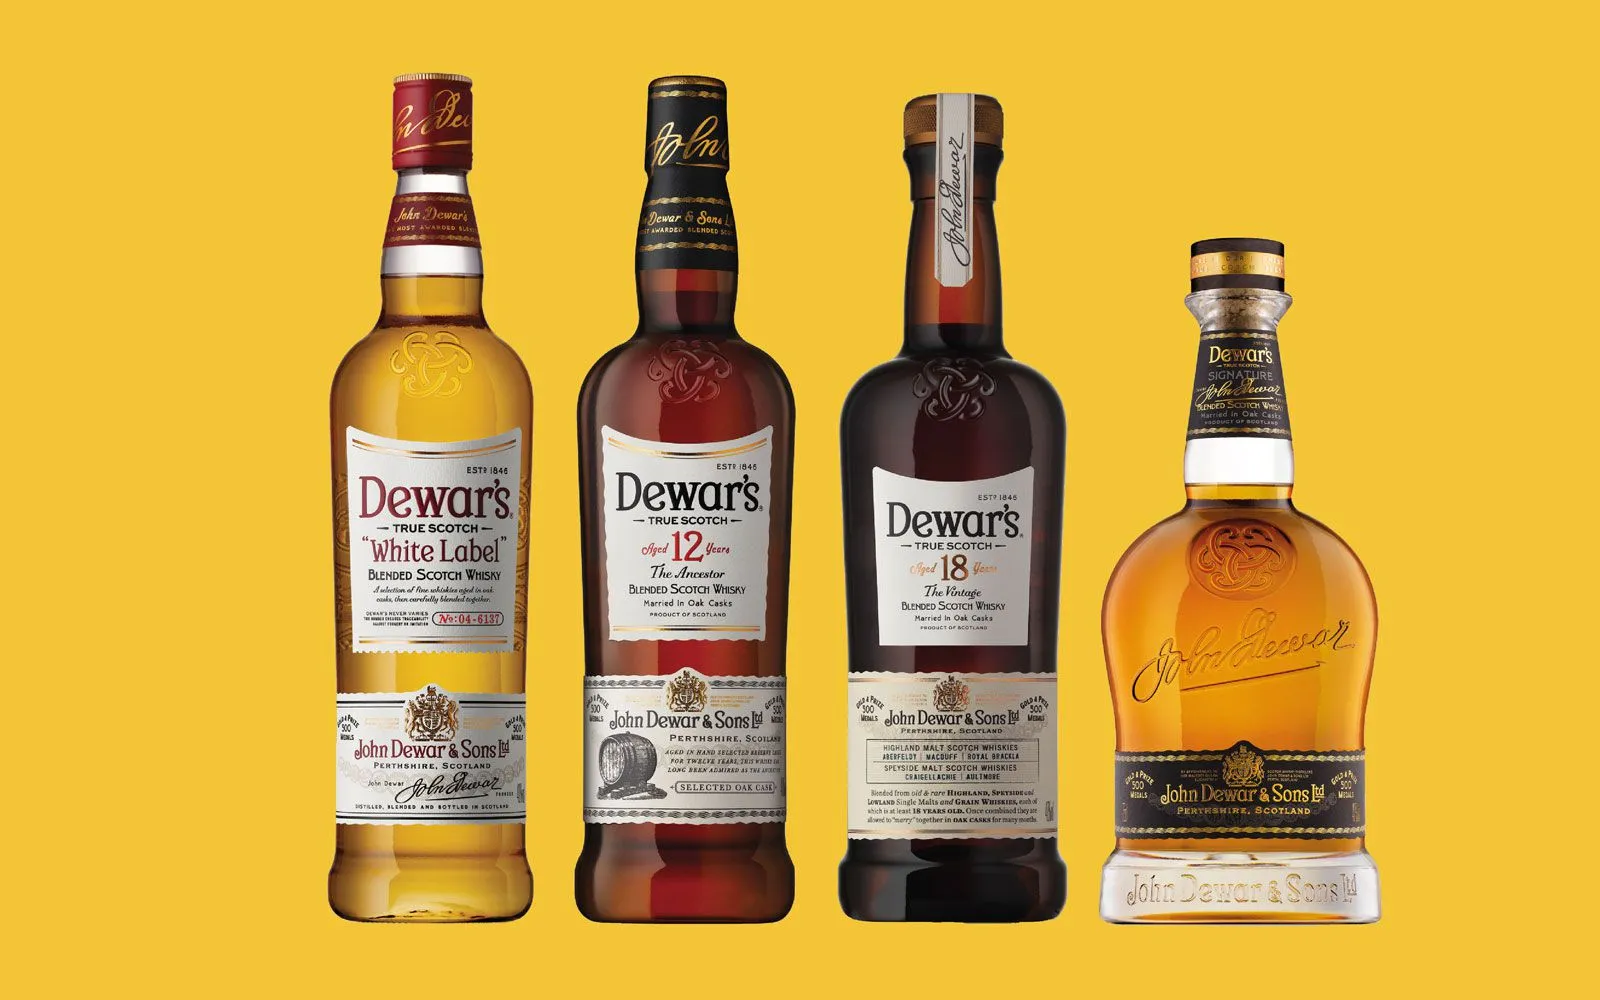 Dewar’s launches new blended Scotch